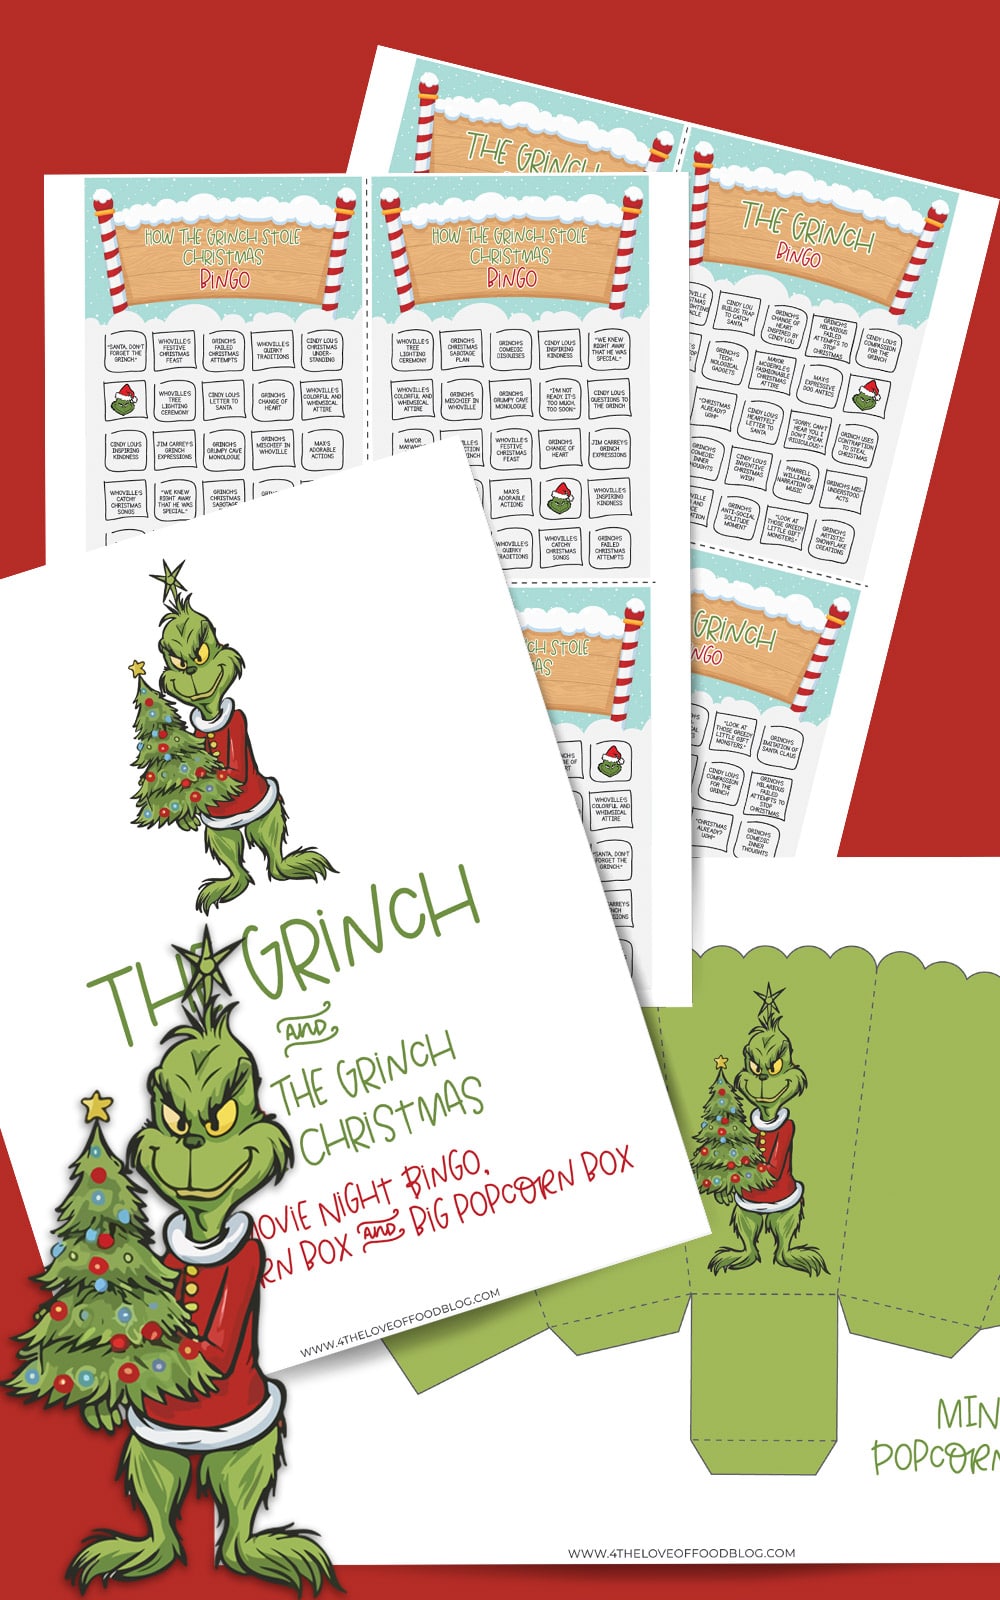 The Grinch Popcorn Box Printables for Family Movie Night